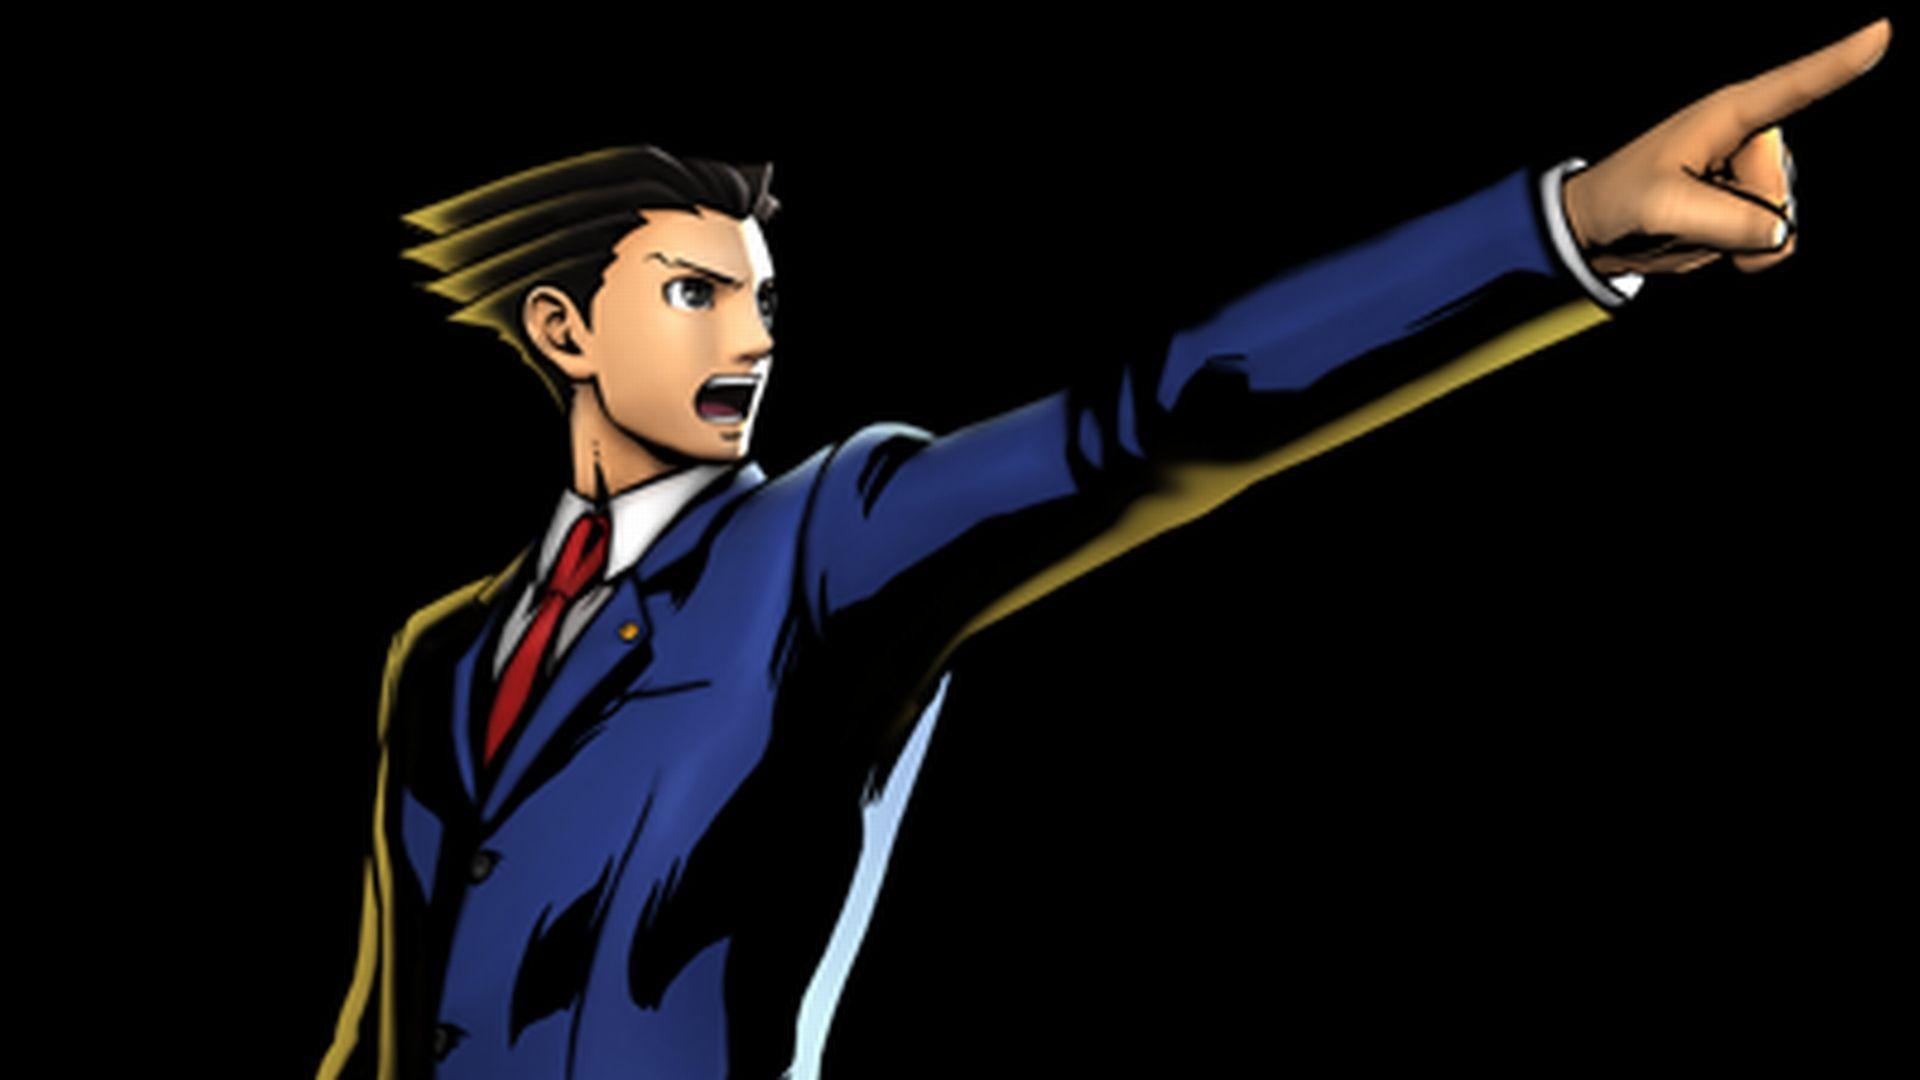 Video Game Phoenix Wright: Ace Attorney Wallpaper 1920x1080 px